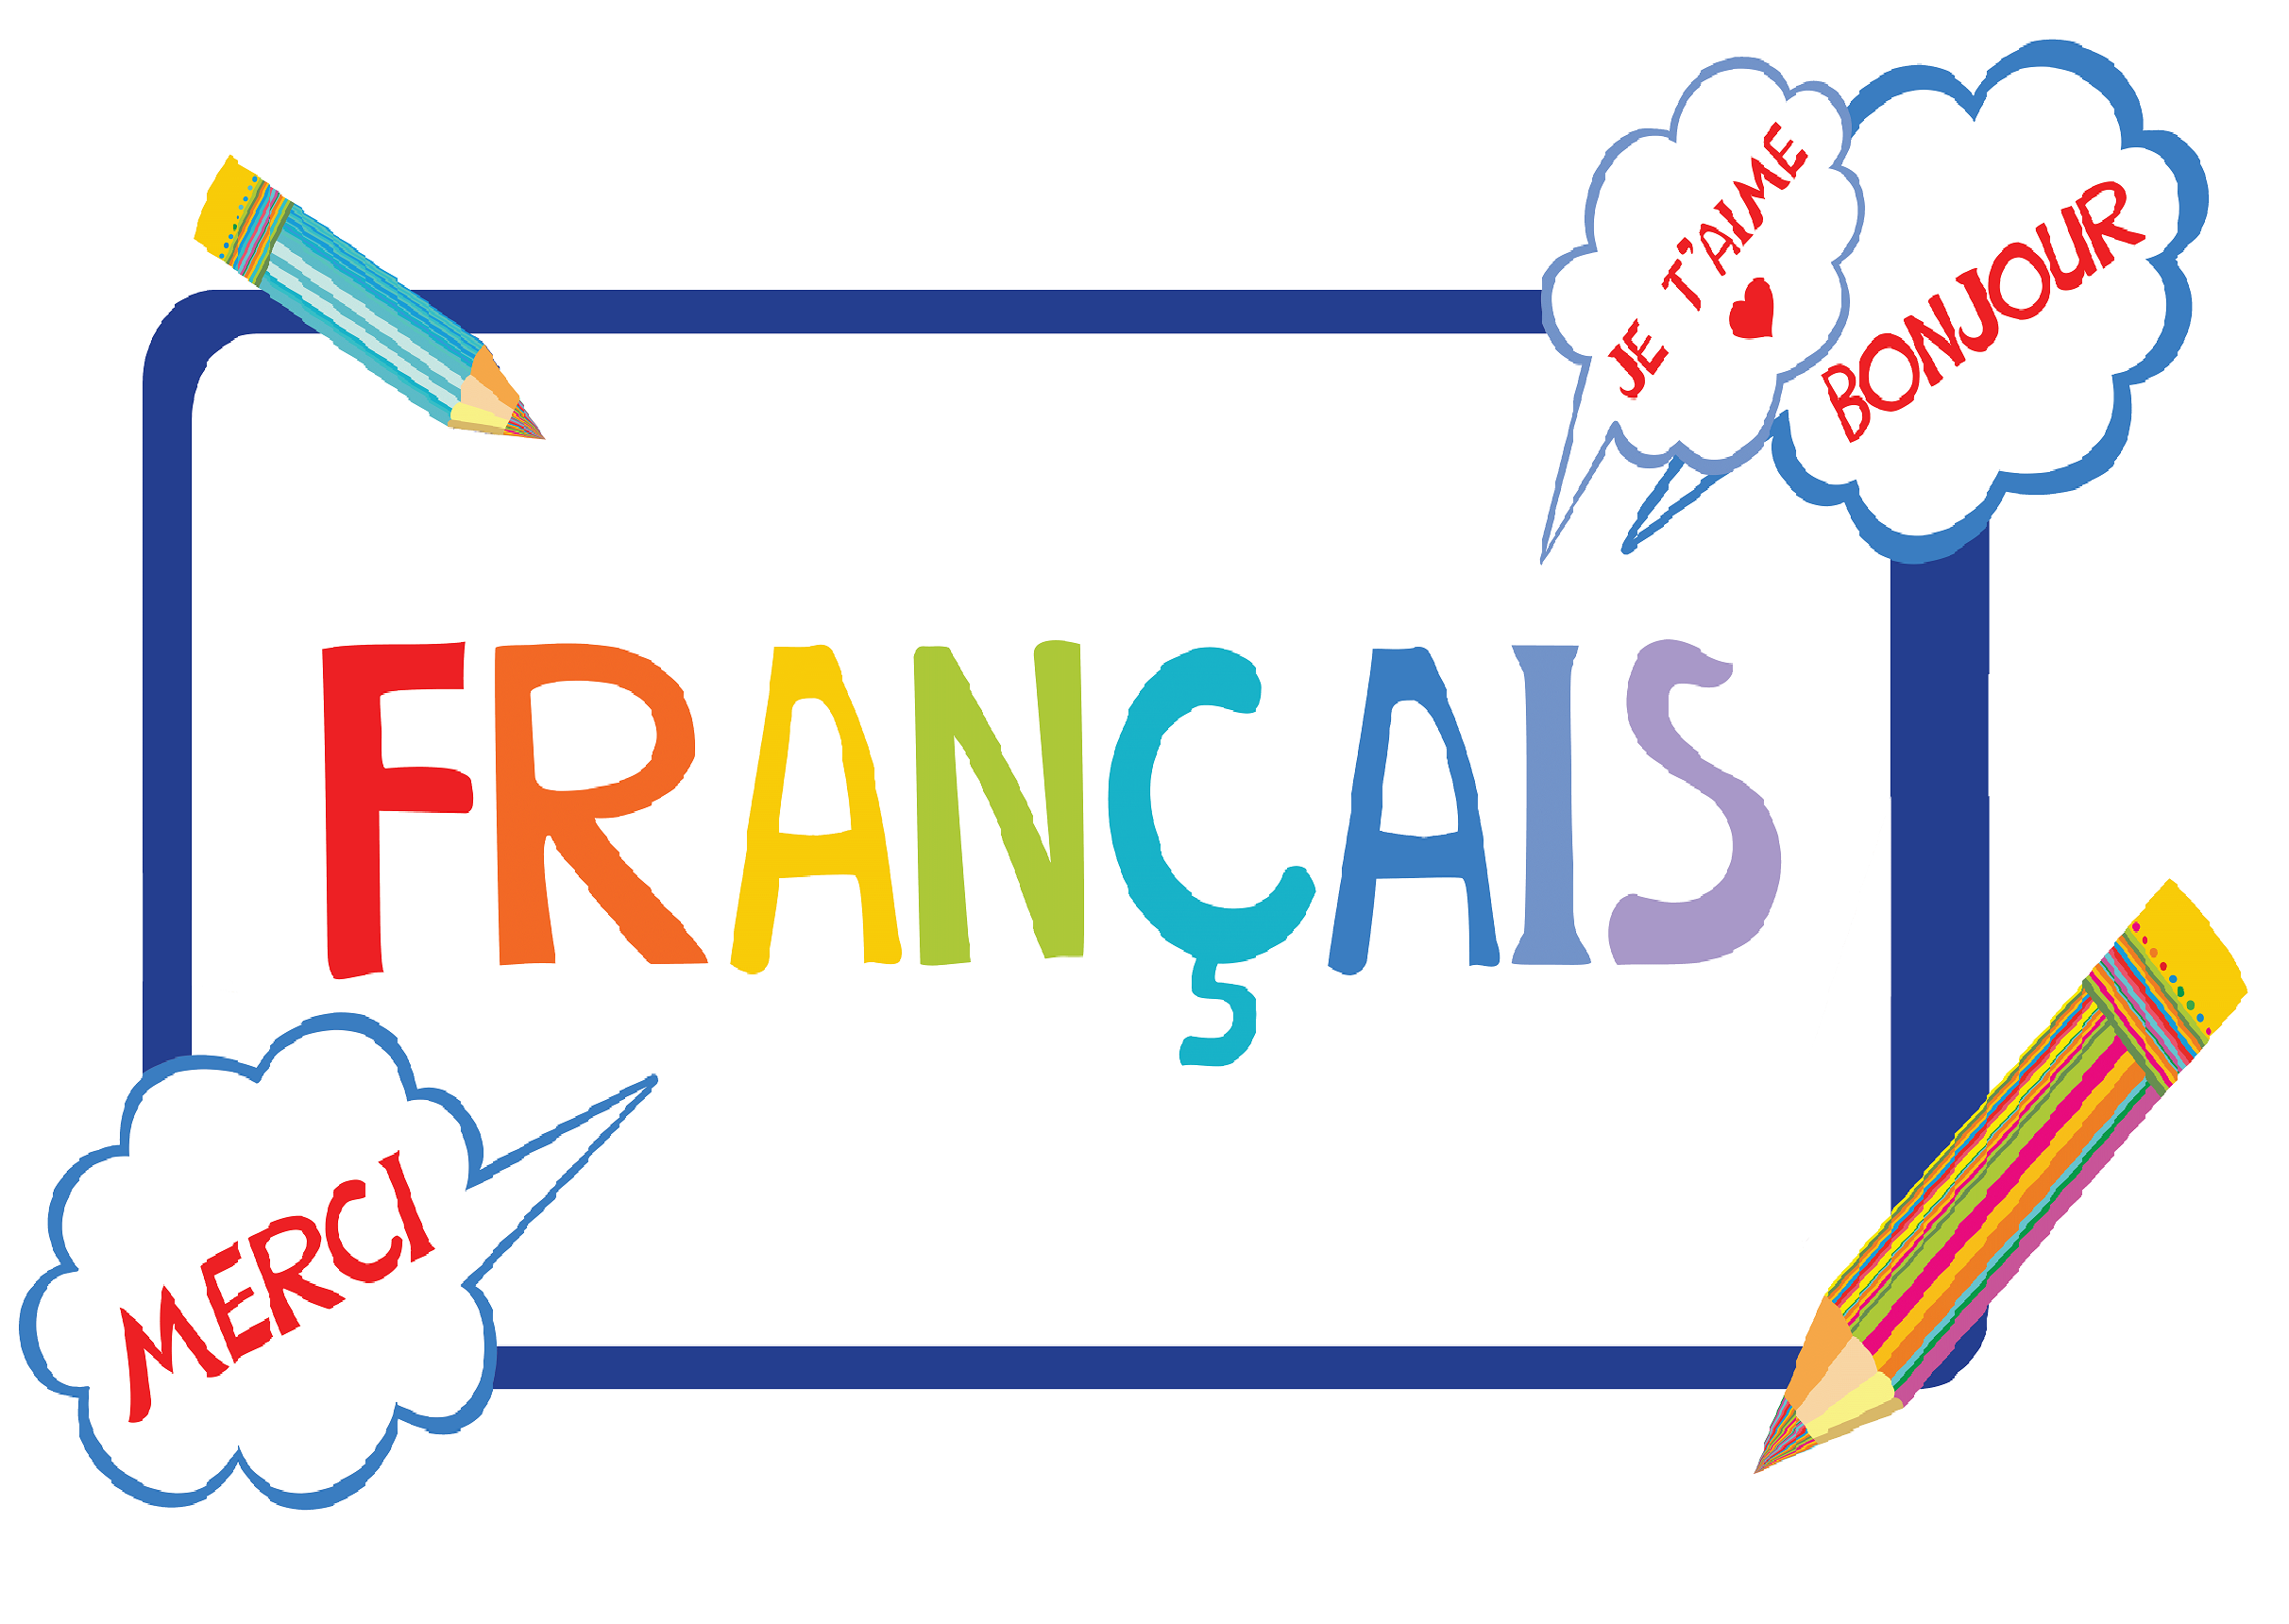 French Class Image - Continuing Education at Seattle Central College 